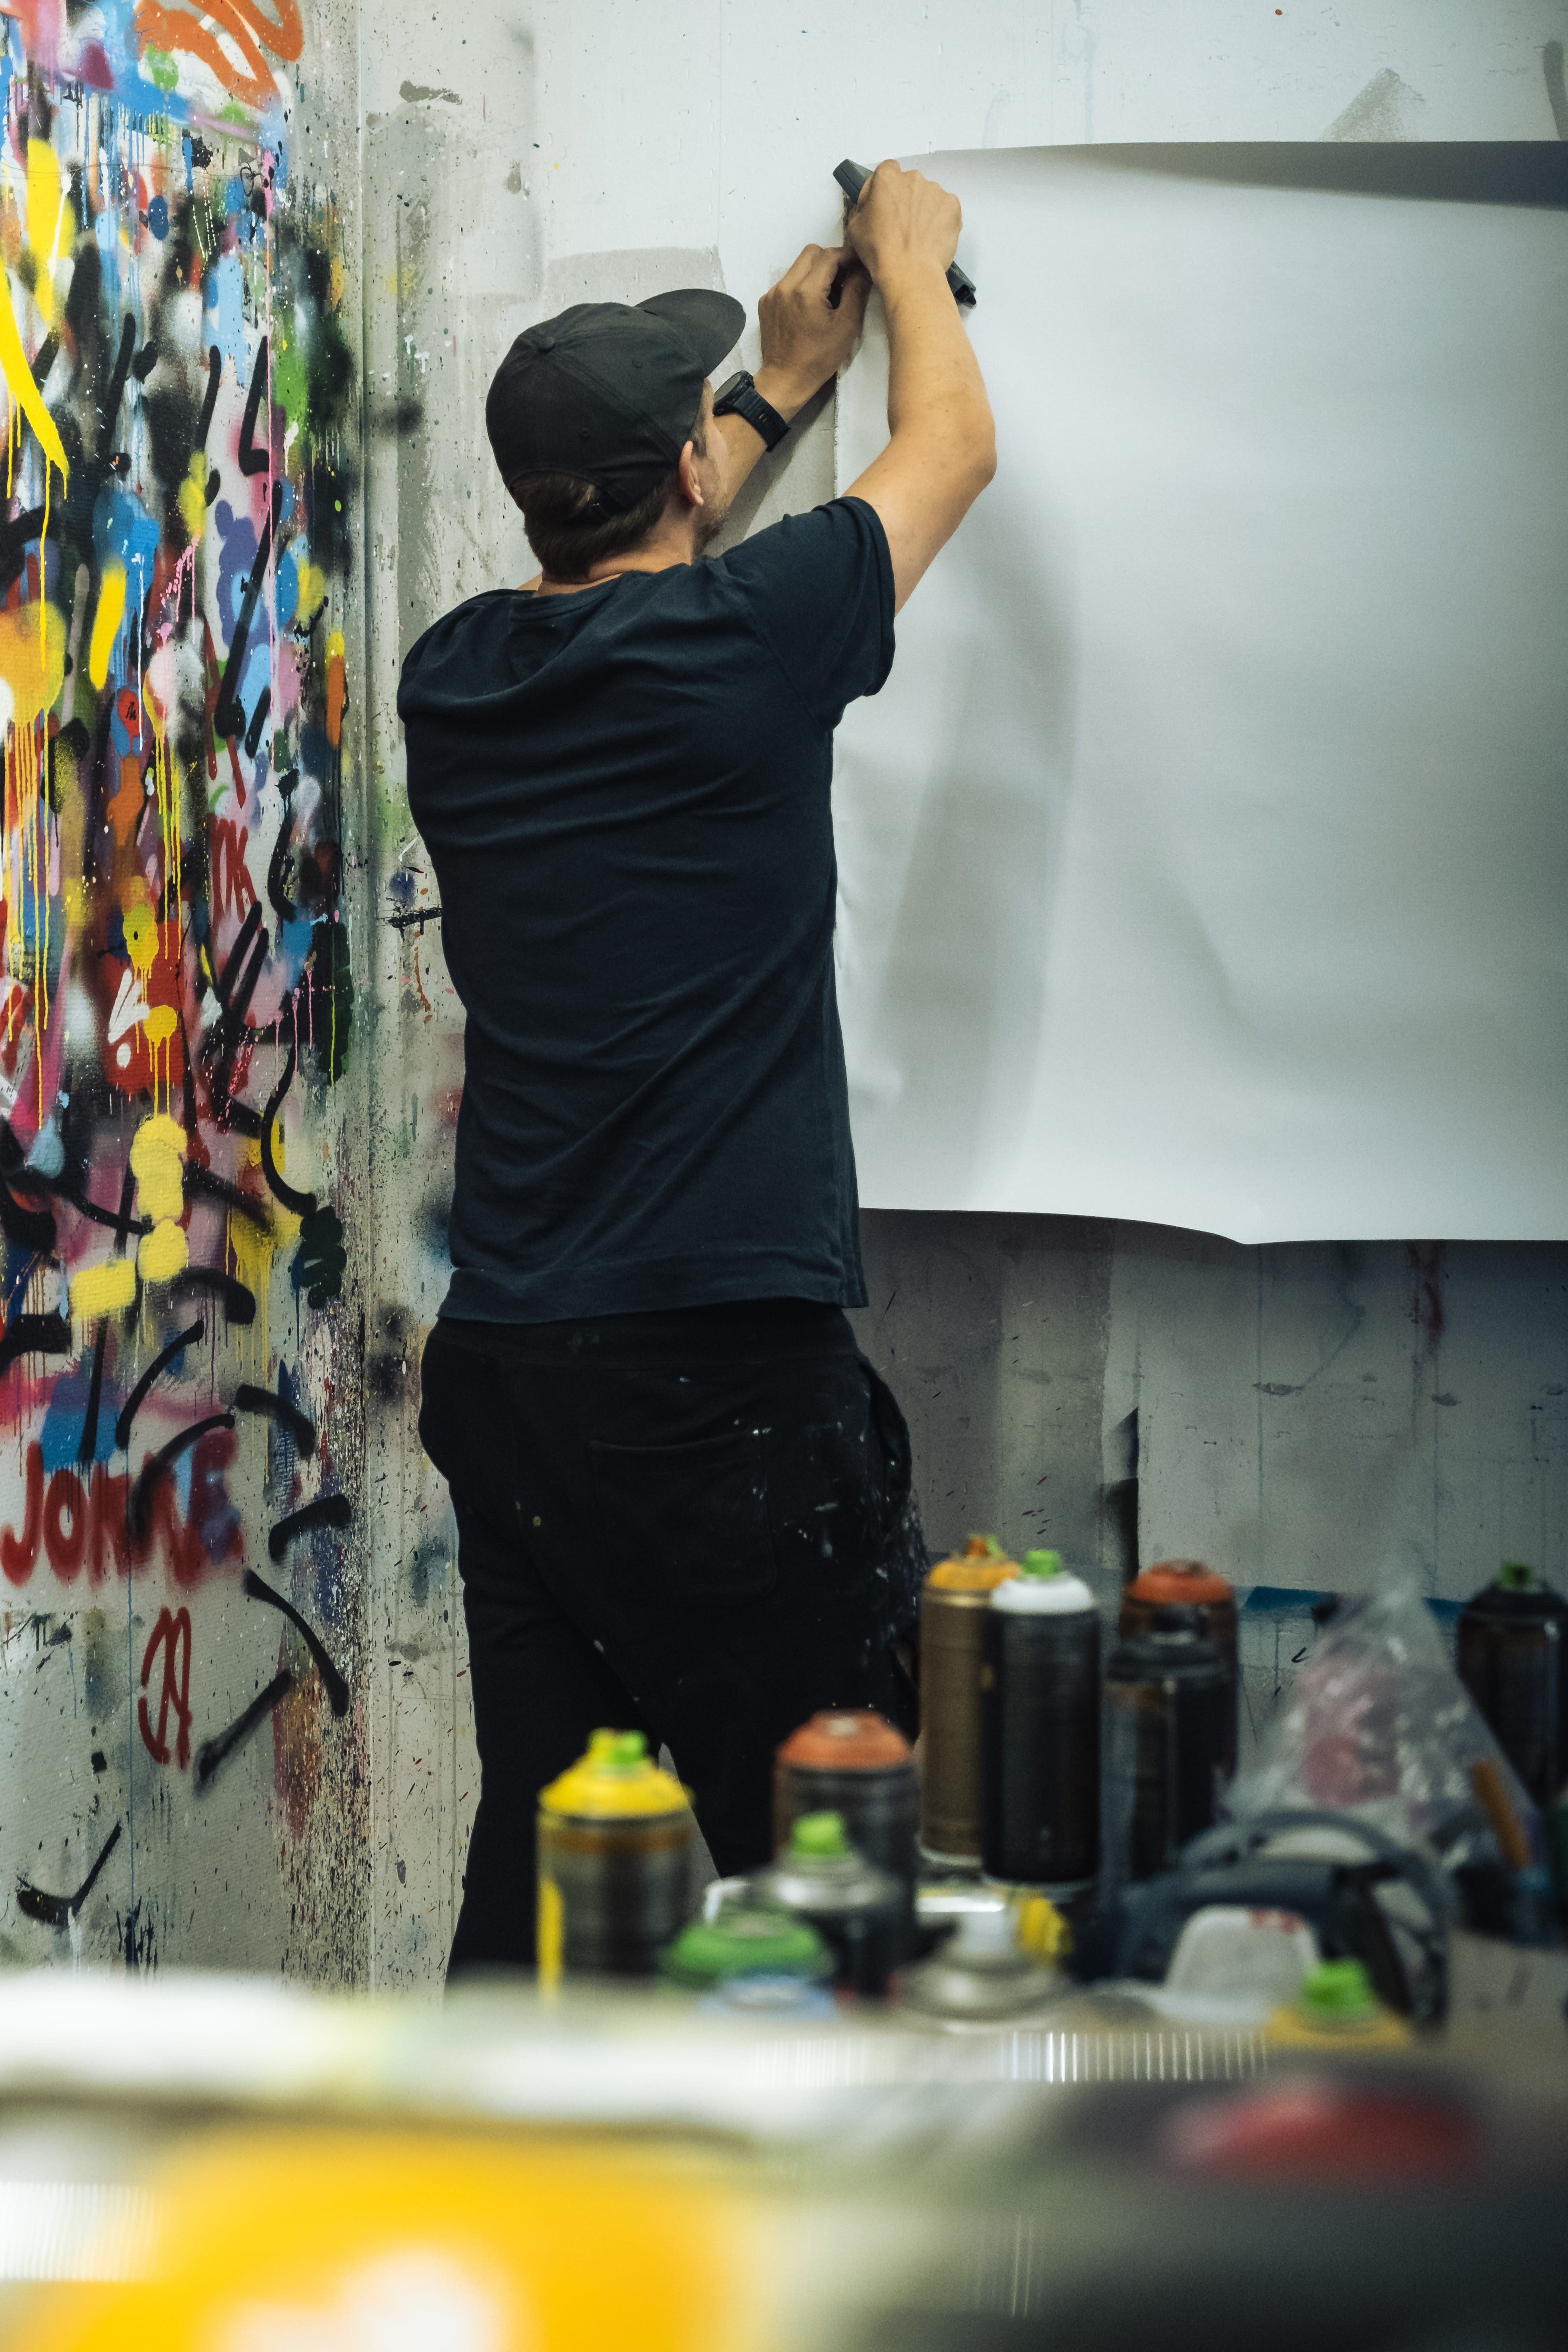 behind the scenes photograph from the studio of Martin Whatson.